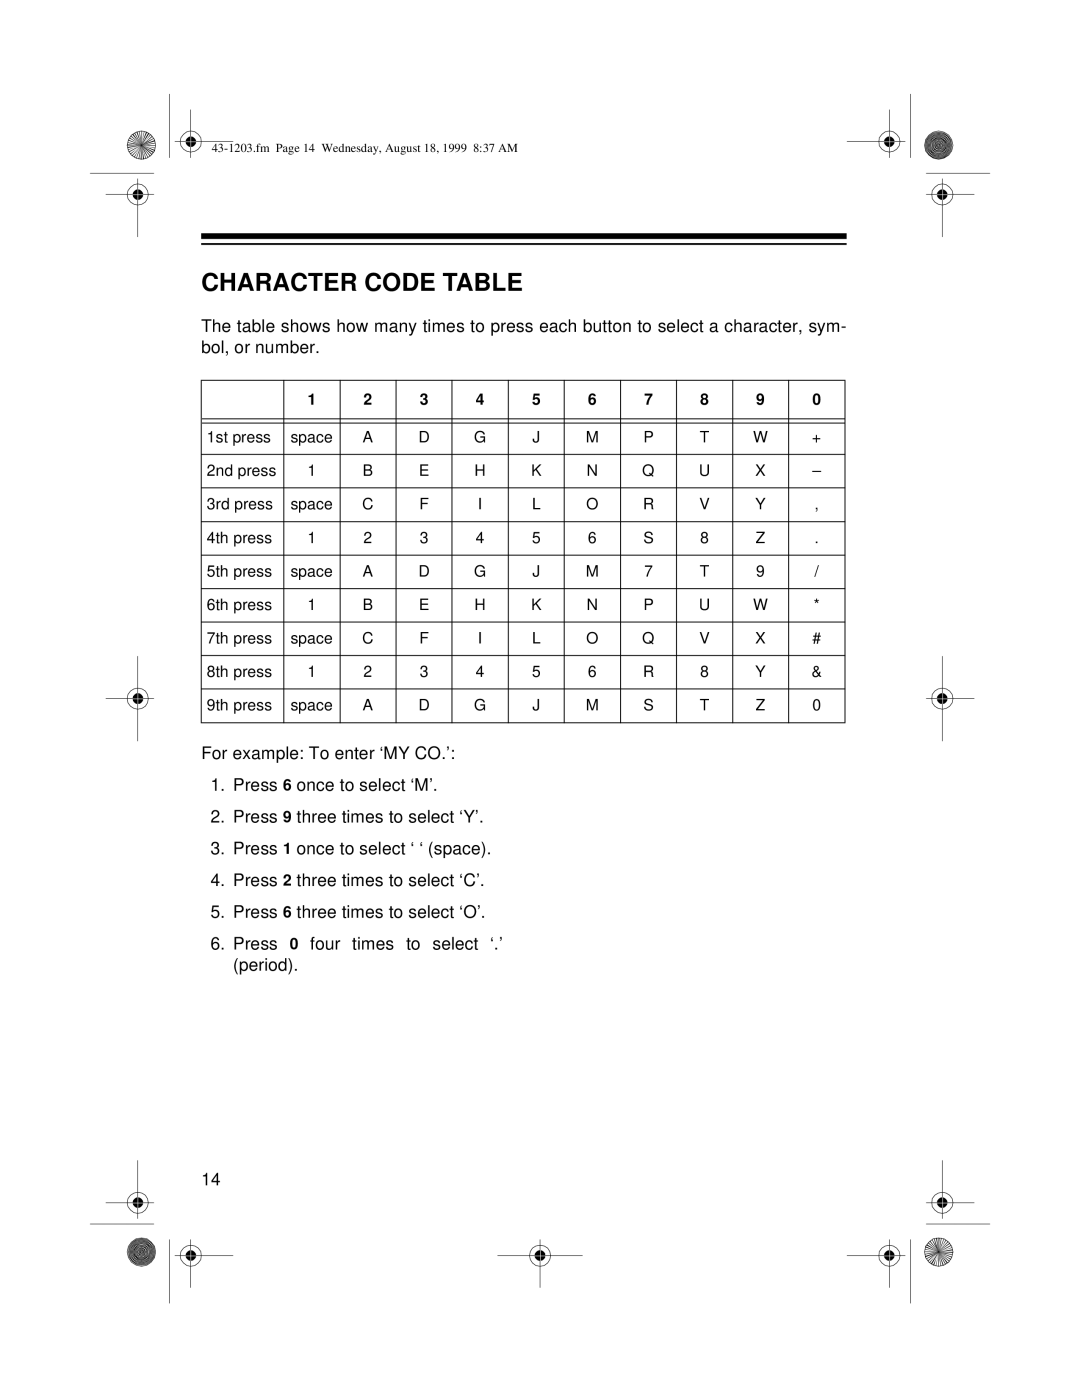 Radio Shack TFX-1031 owner manual Character Code Table 